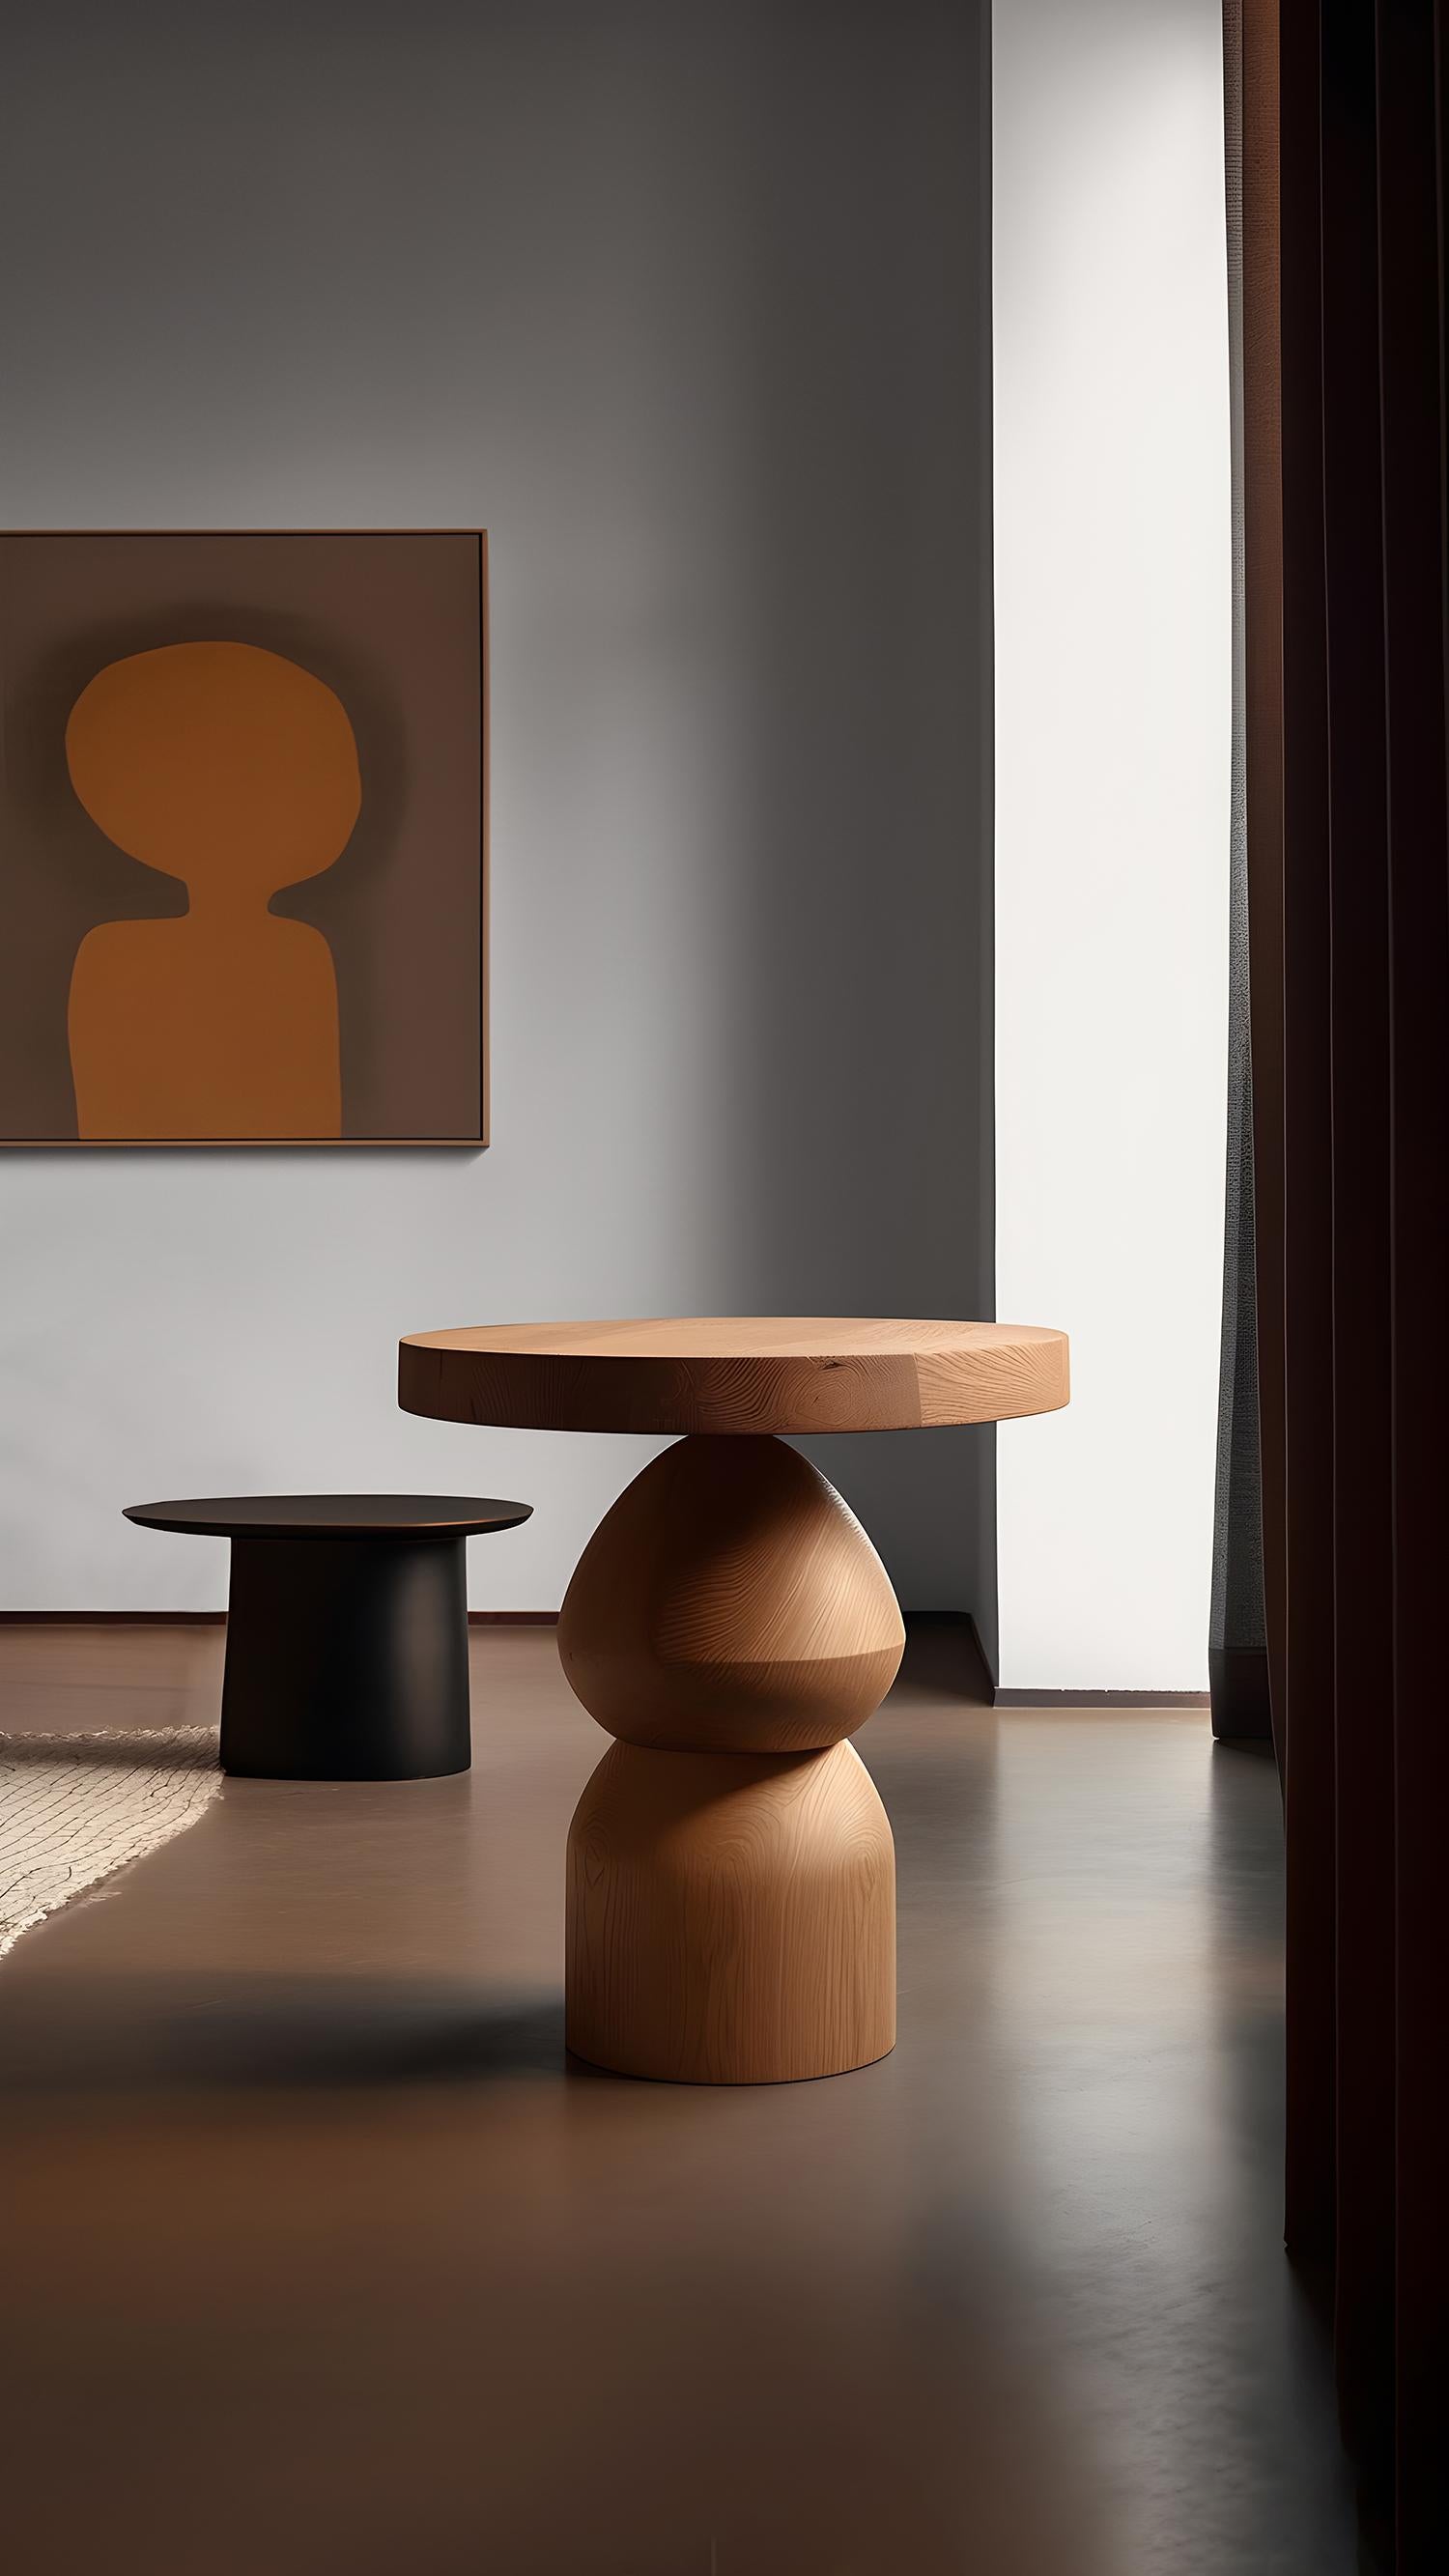 Socle side table, auxiliary table, night stand

Socle is a small solid wood table designed by the NONO design team. Made of solid wood, its elaborated construction serves as a support, much like a plinth for a statue or sculpture.

In the past, the